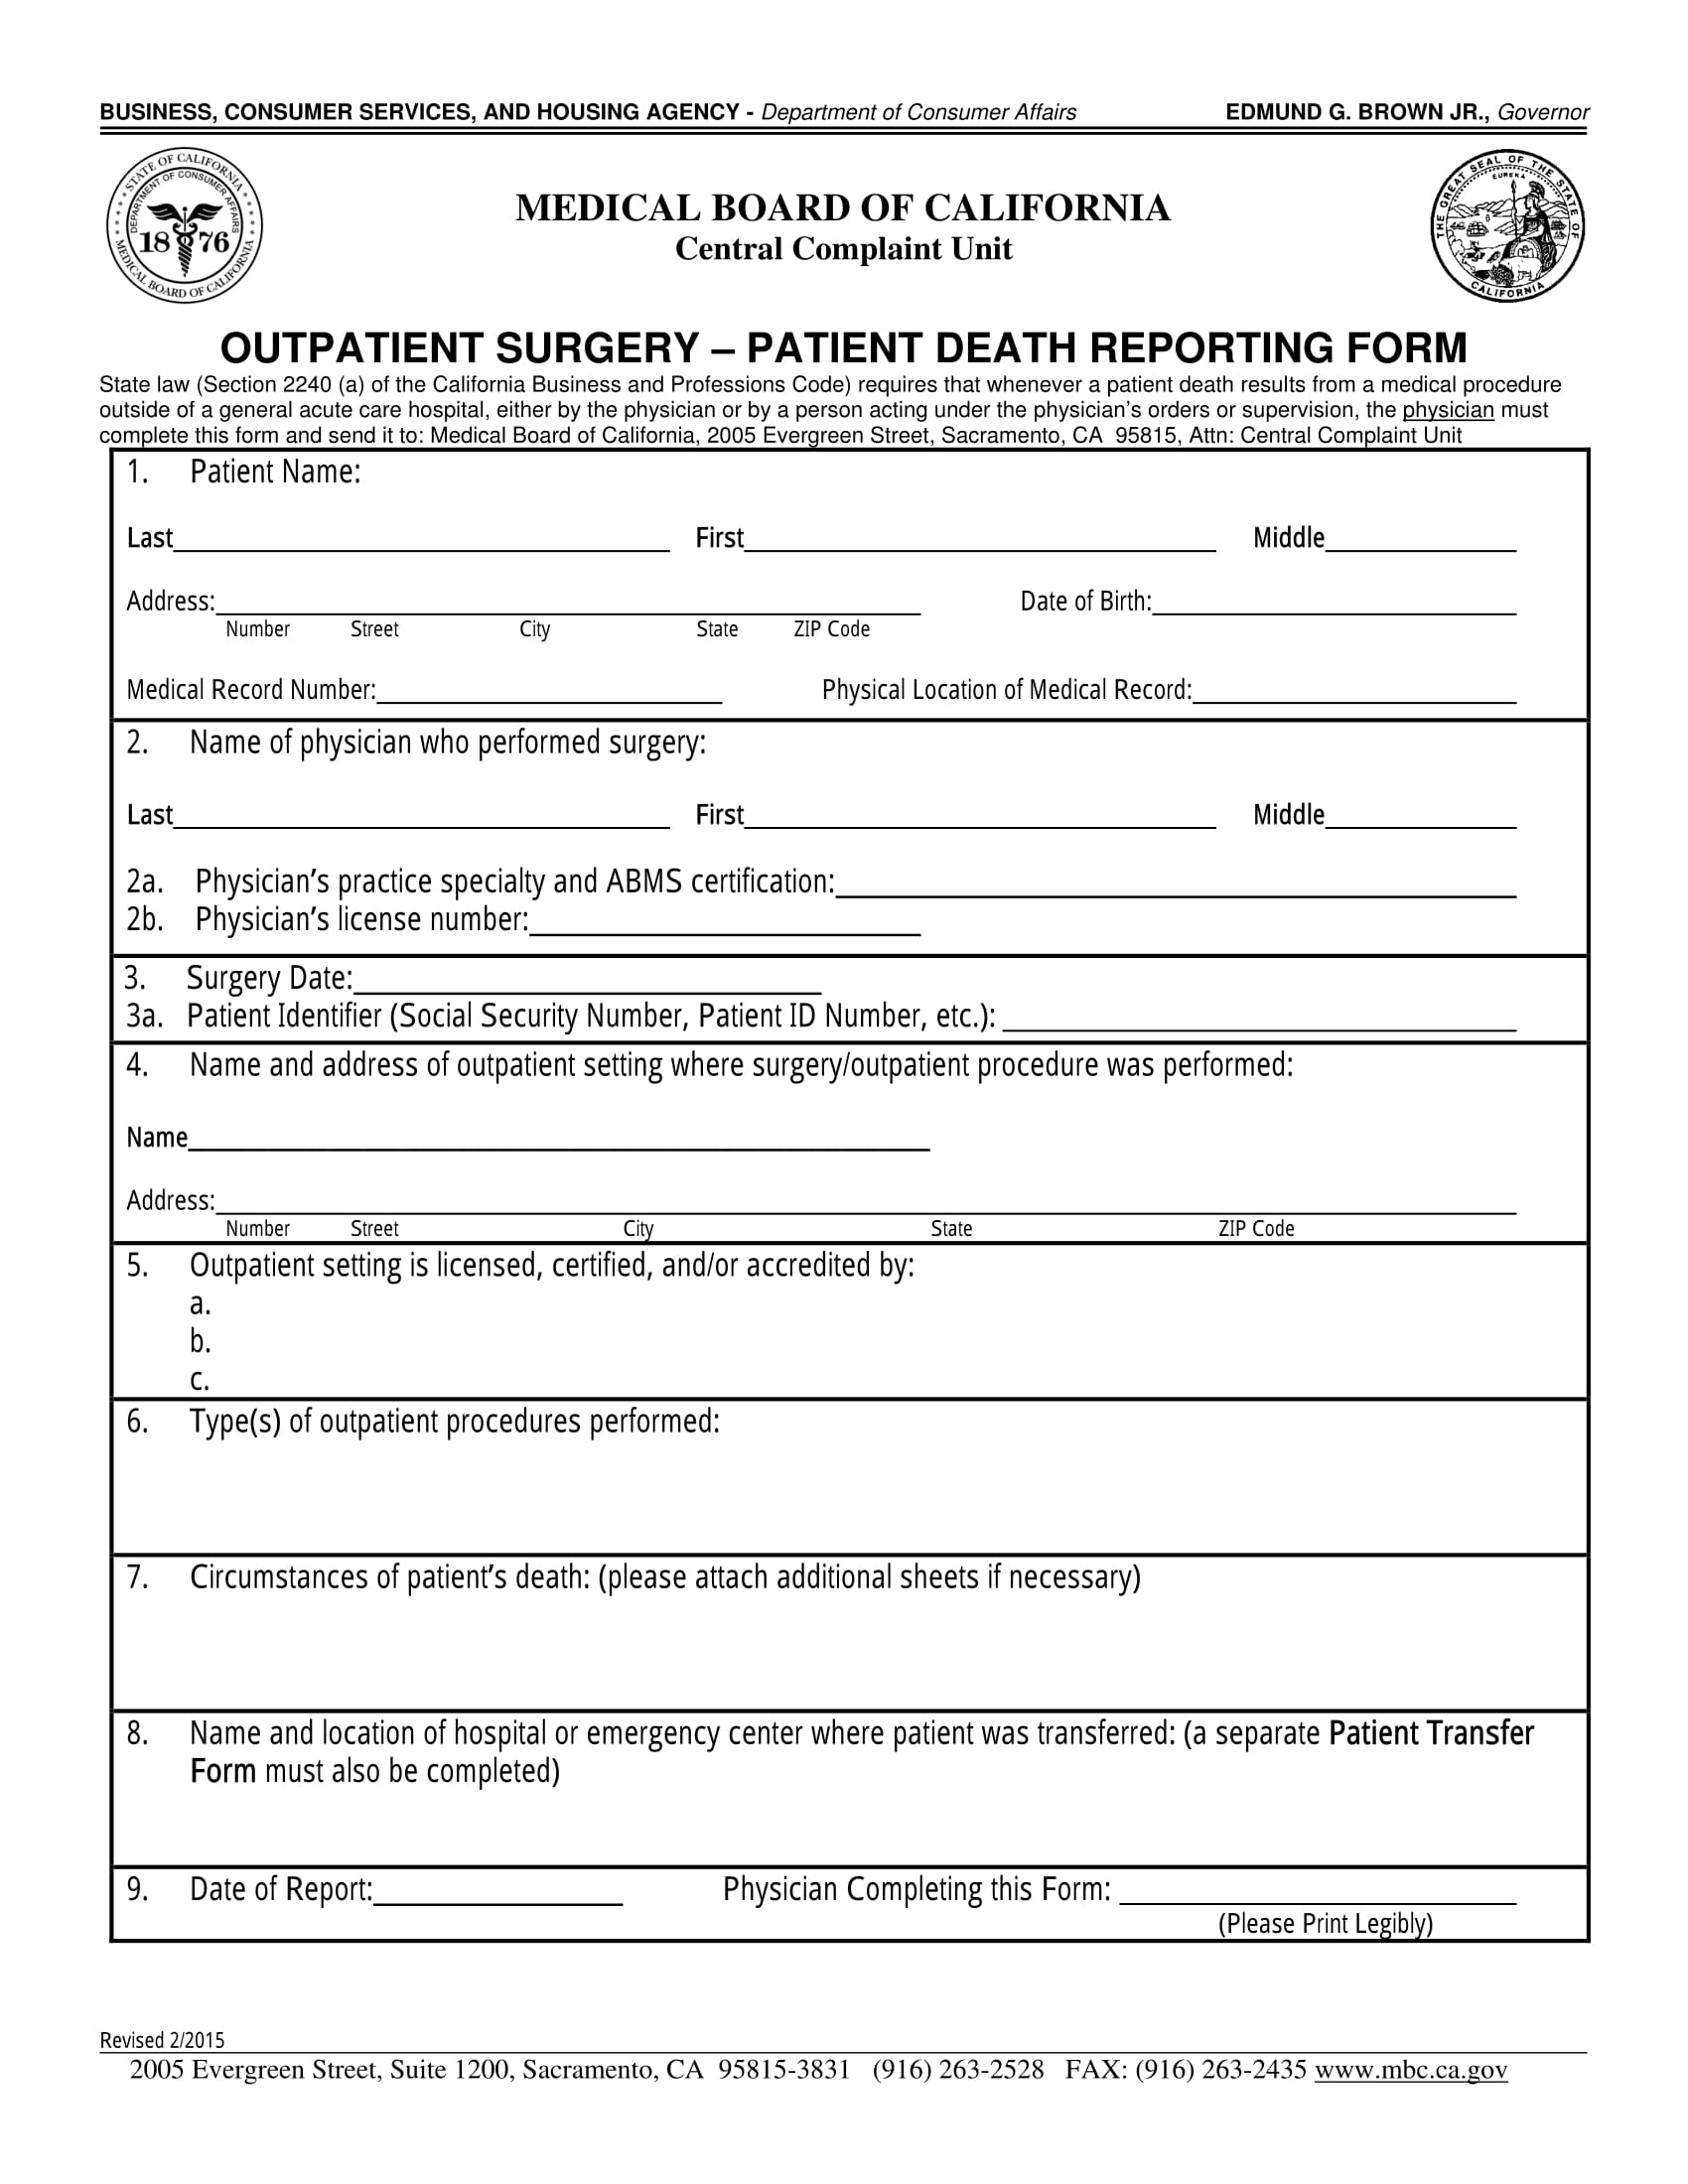 patient death reporting form 1